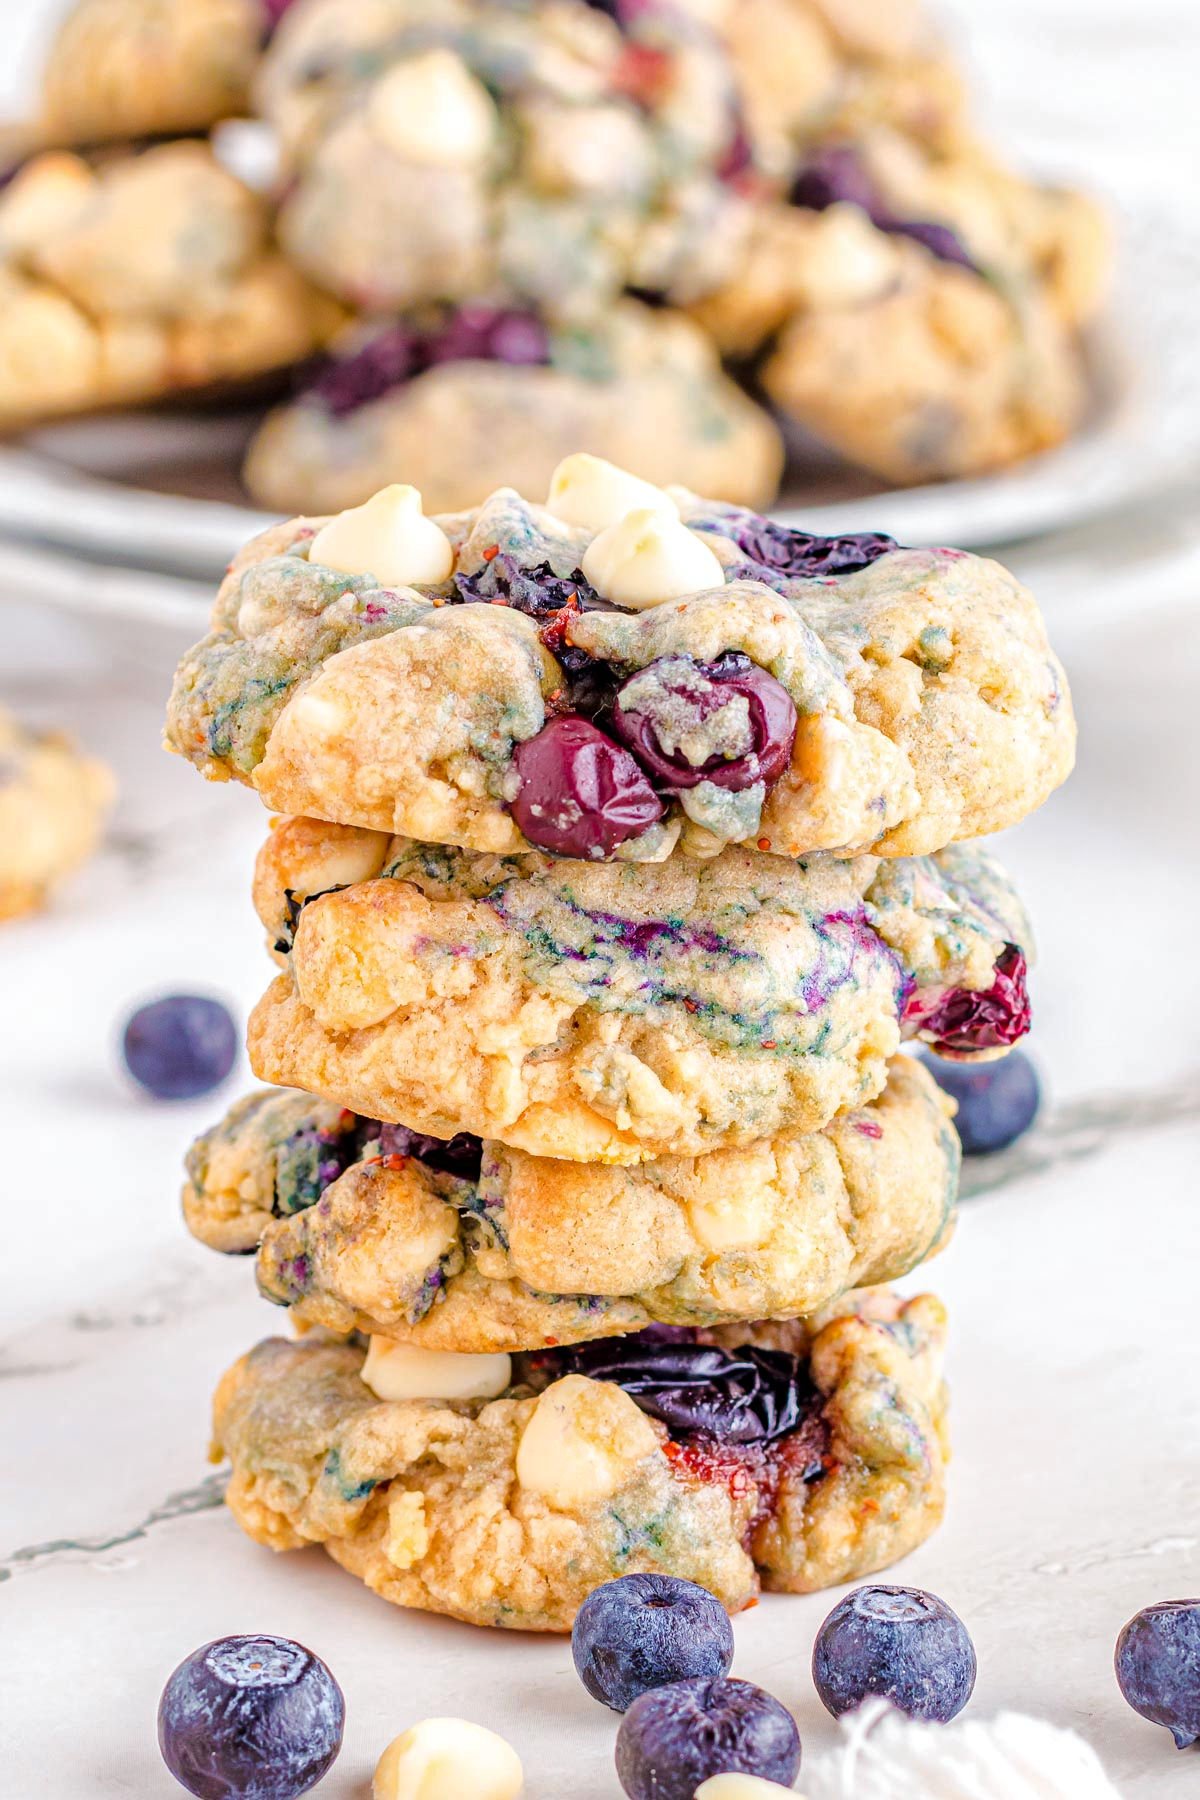 four blueberry cookies are stacked on a table. bluberries and white chocolate chips are scattered on the table in front of the cookies.